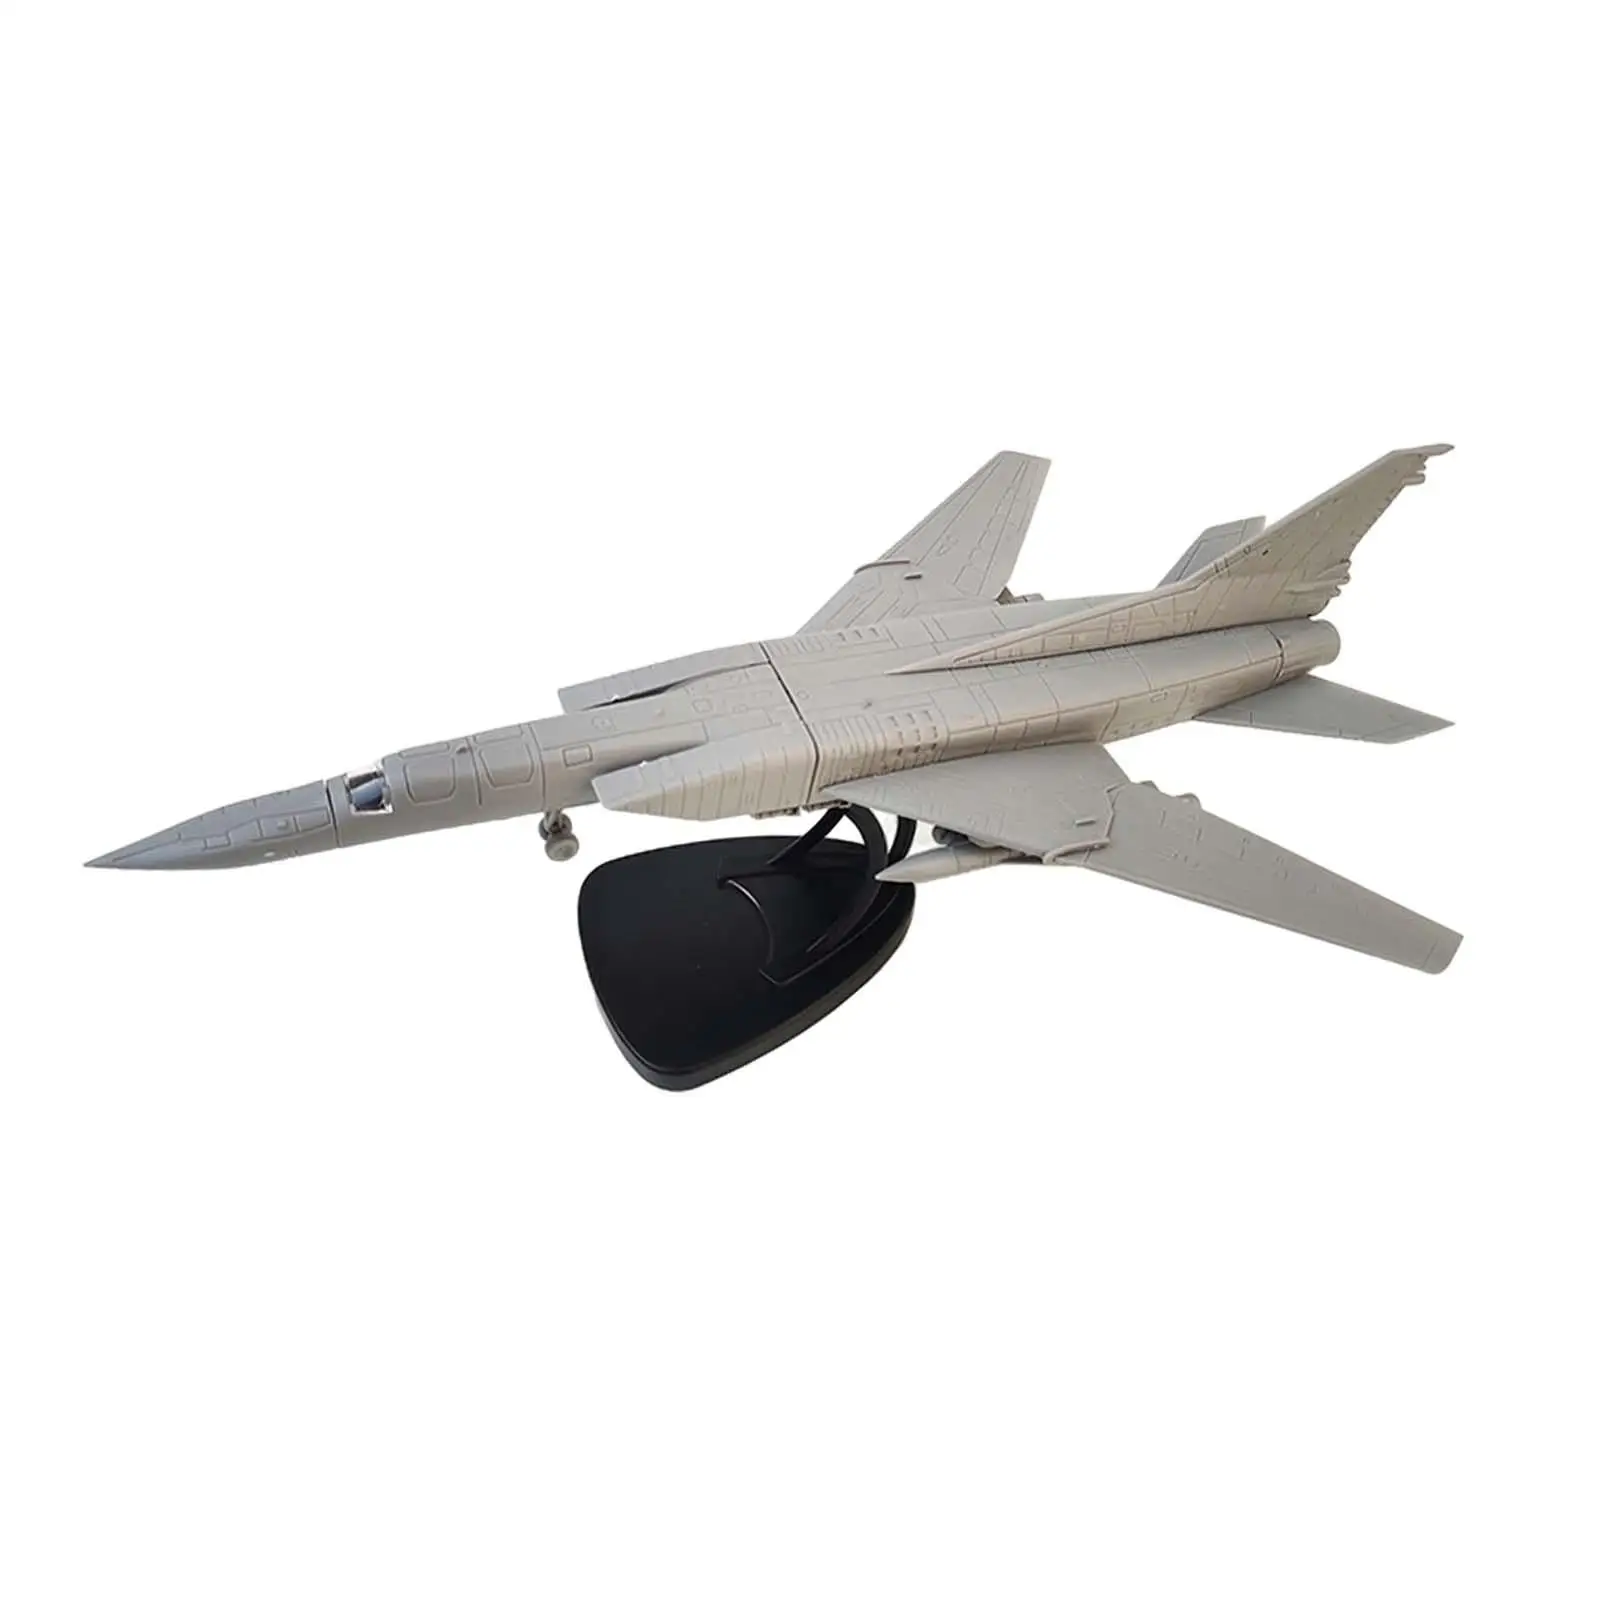 

Simulation Miniature Toys with Display Stand 1/144 Bomber Airplane Model for Office Science Museum Shelf Living Room Enthusiast